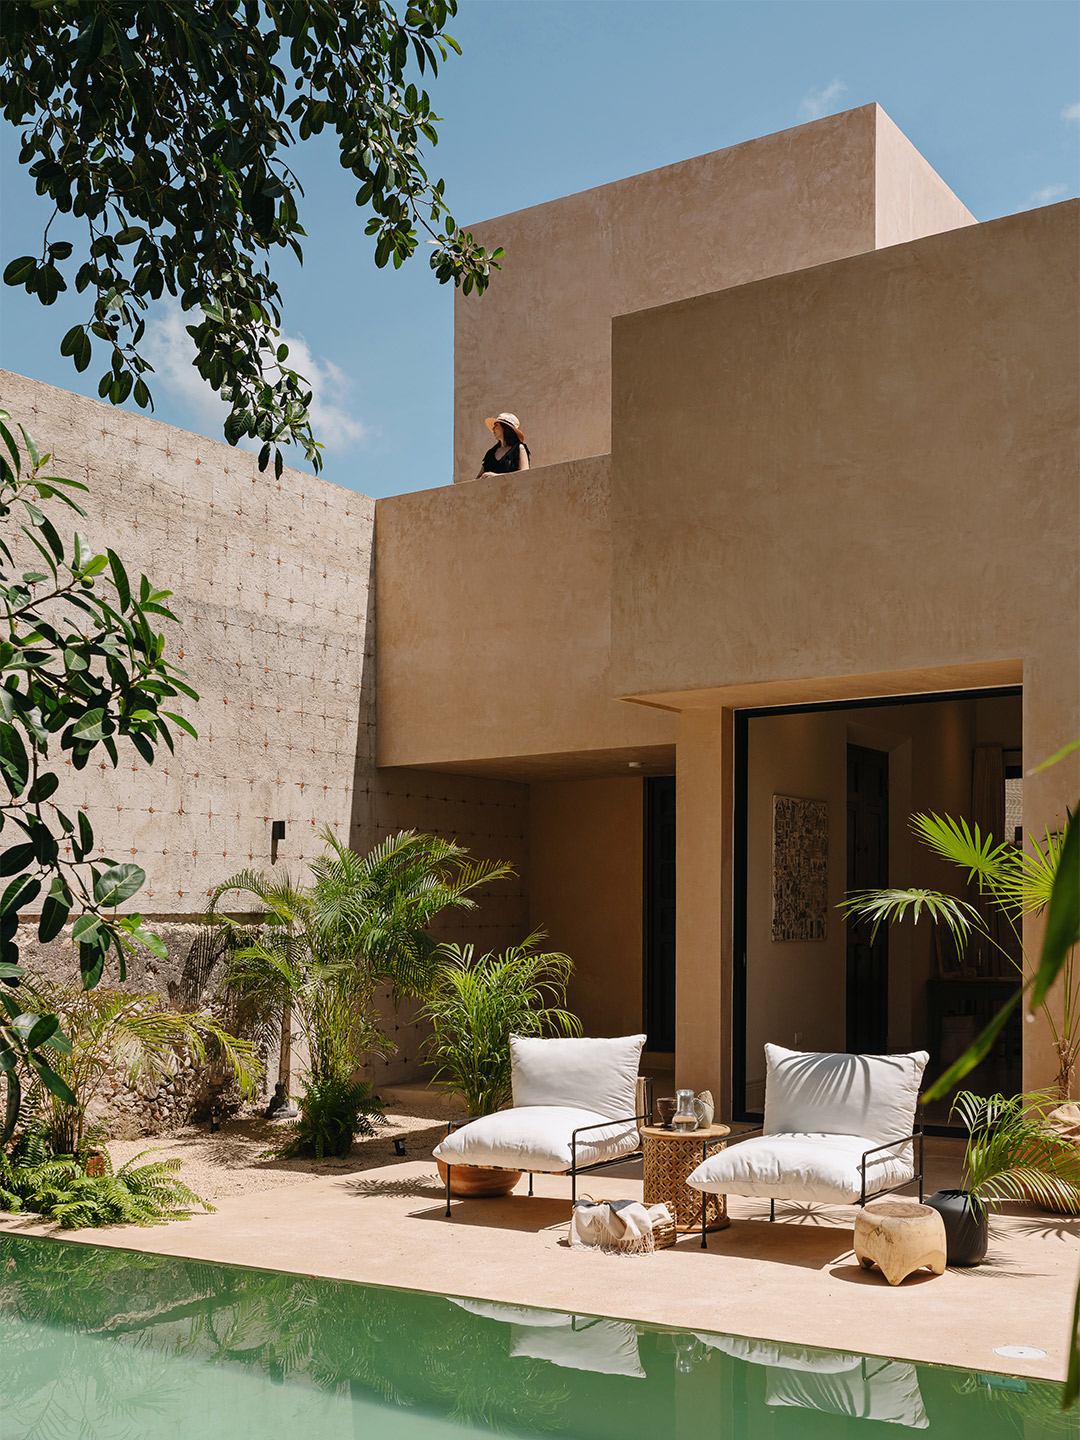 Home tour: A lush oasis rests at the heart of Casa Huolpoch in Mexico